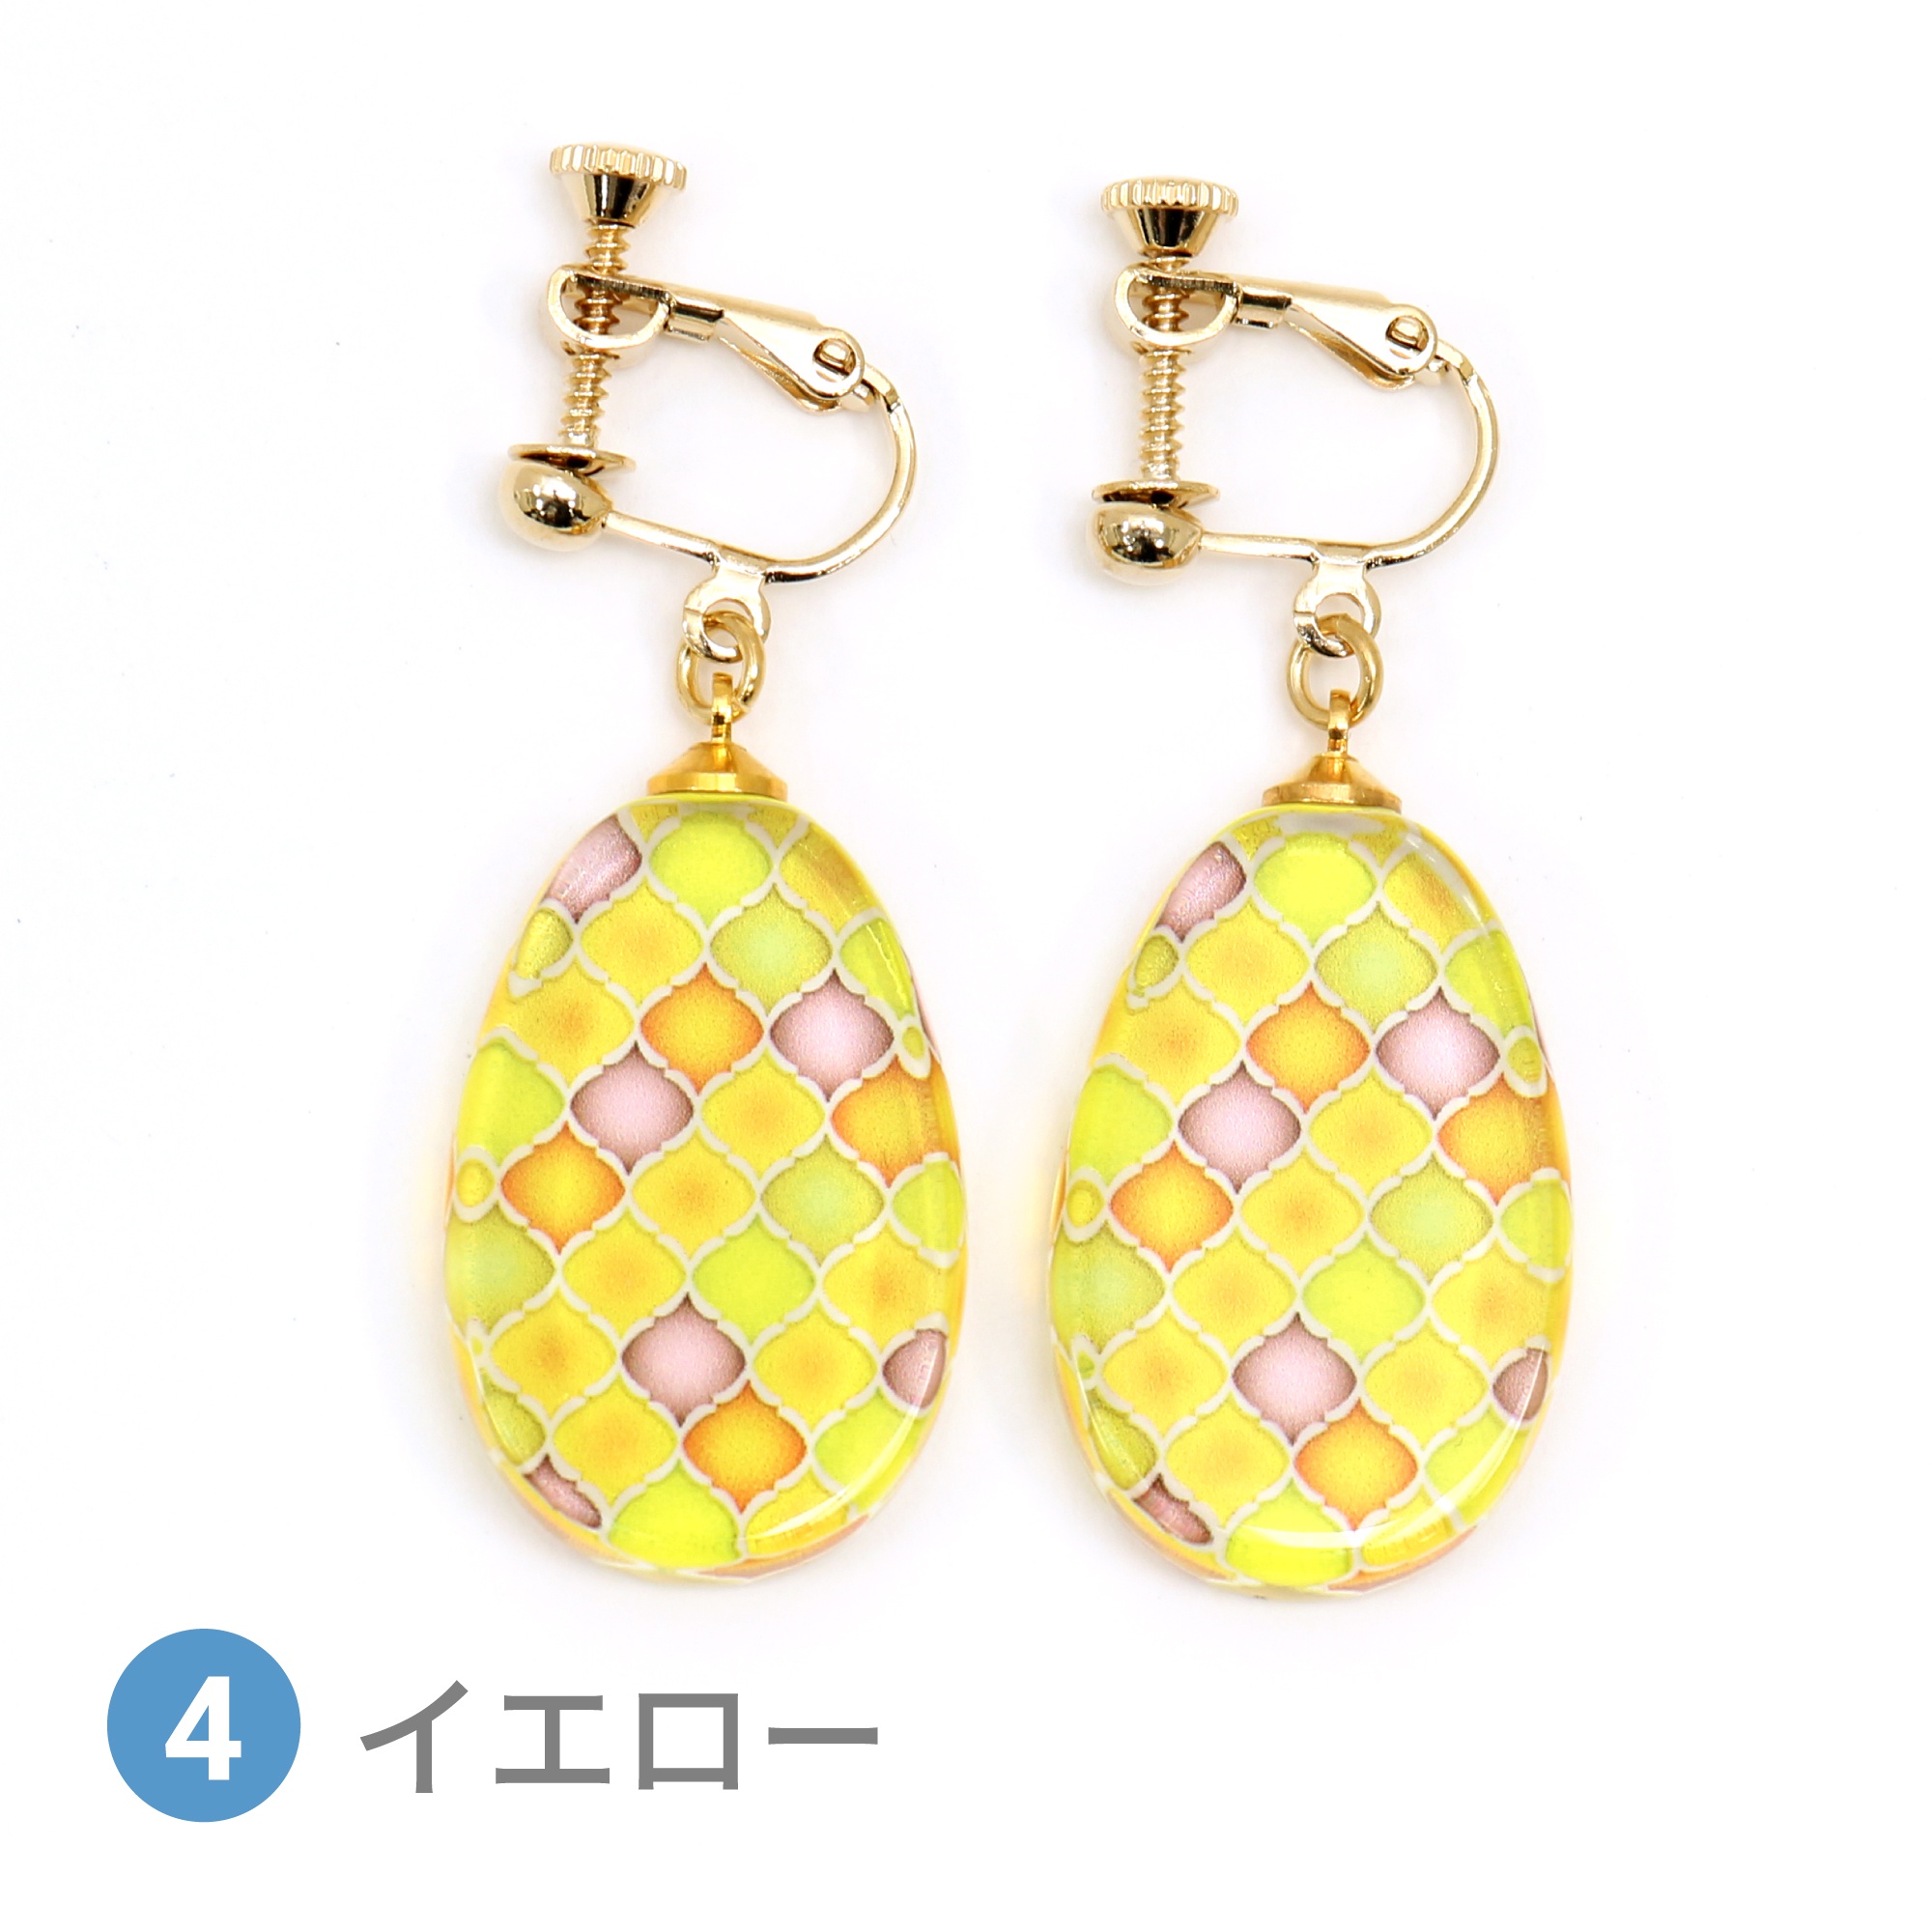 Glass accessories Earring MOROCCAN yellow drop shape